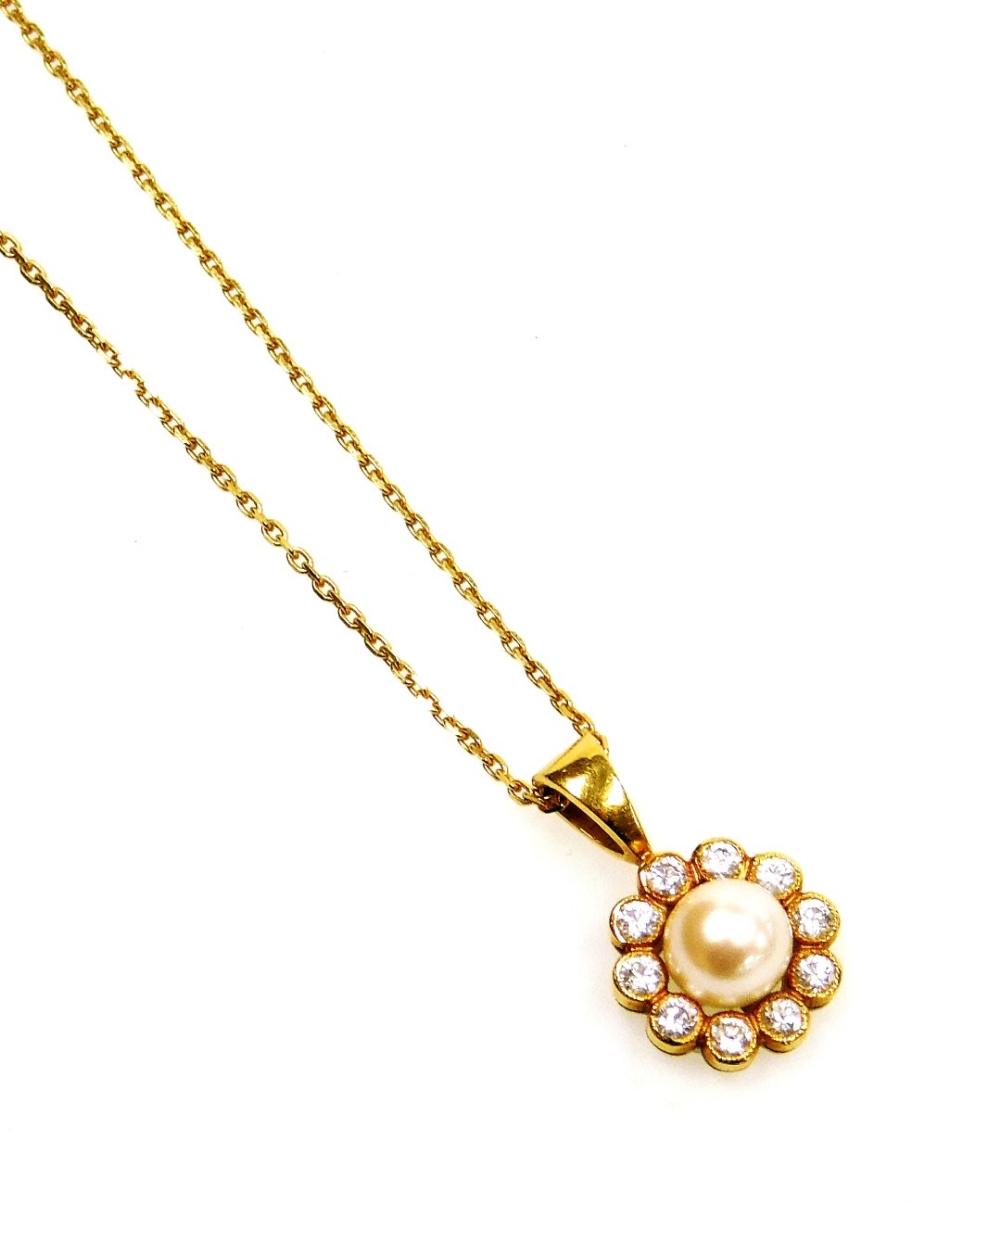 An 18ct gold pearl and diamond cluster pendant, with central cultured pearl surrounded by tiny diamo